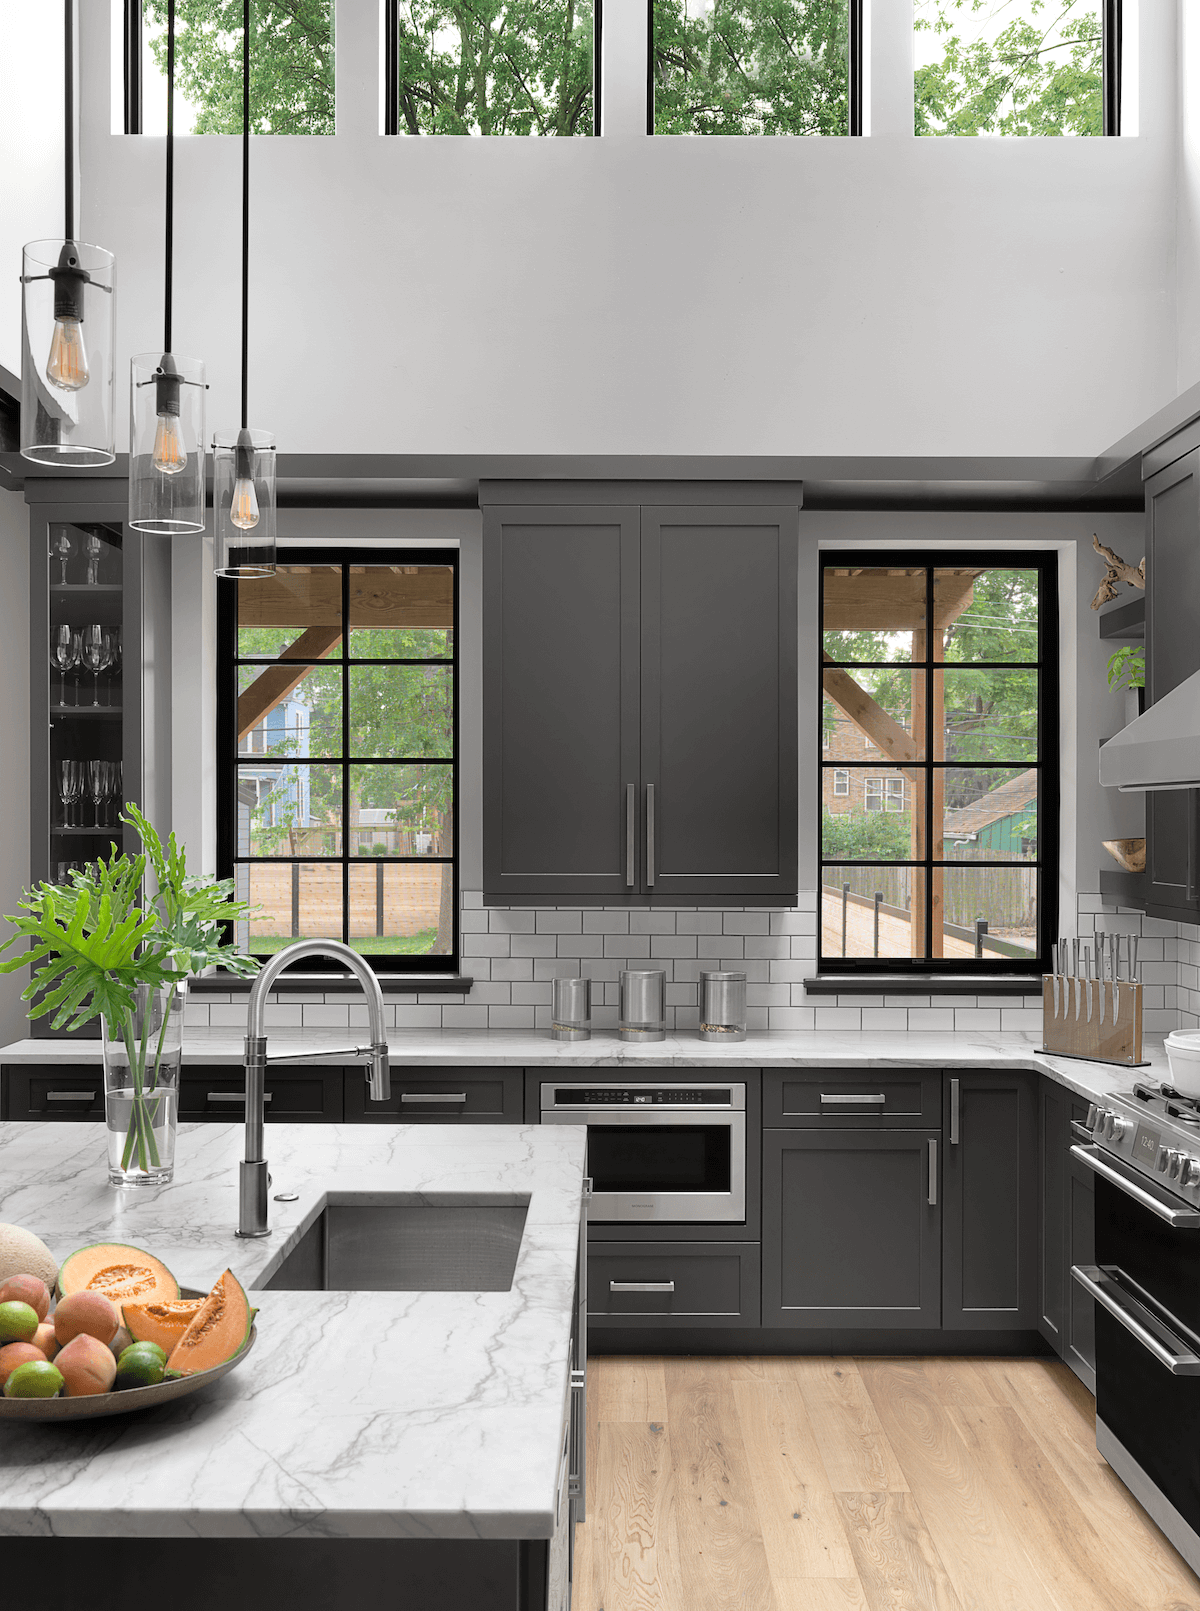 Modern kitchen renovation with grey cabinets and stone countertops